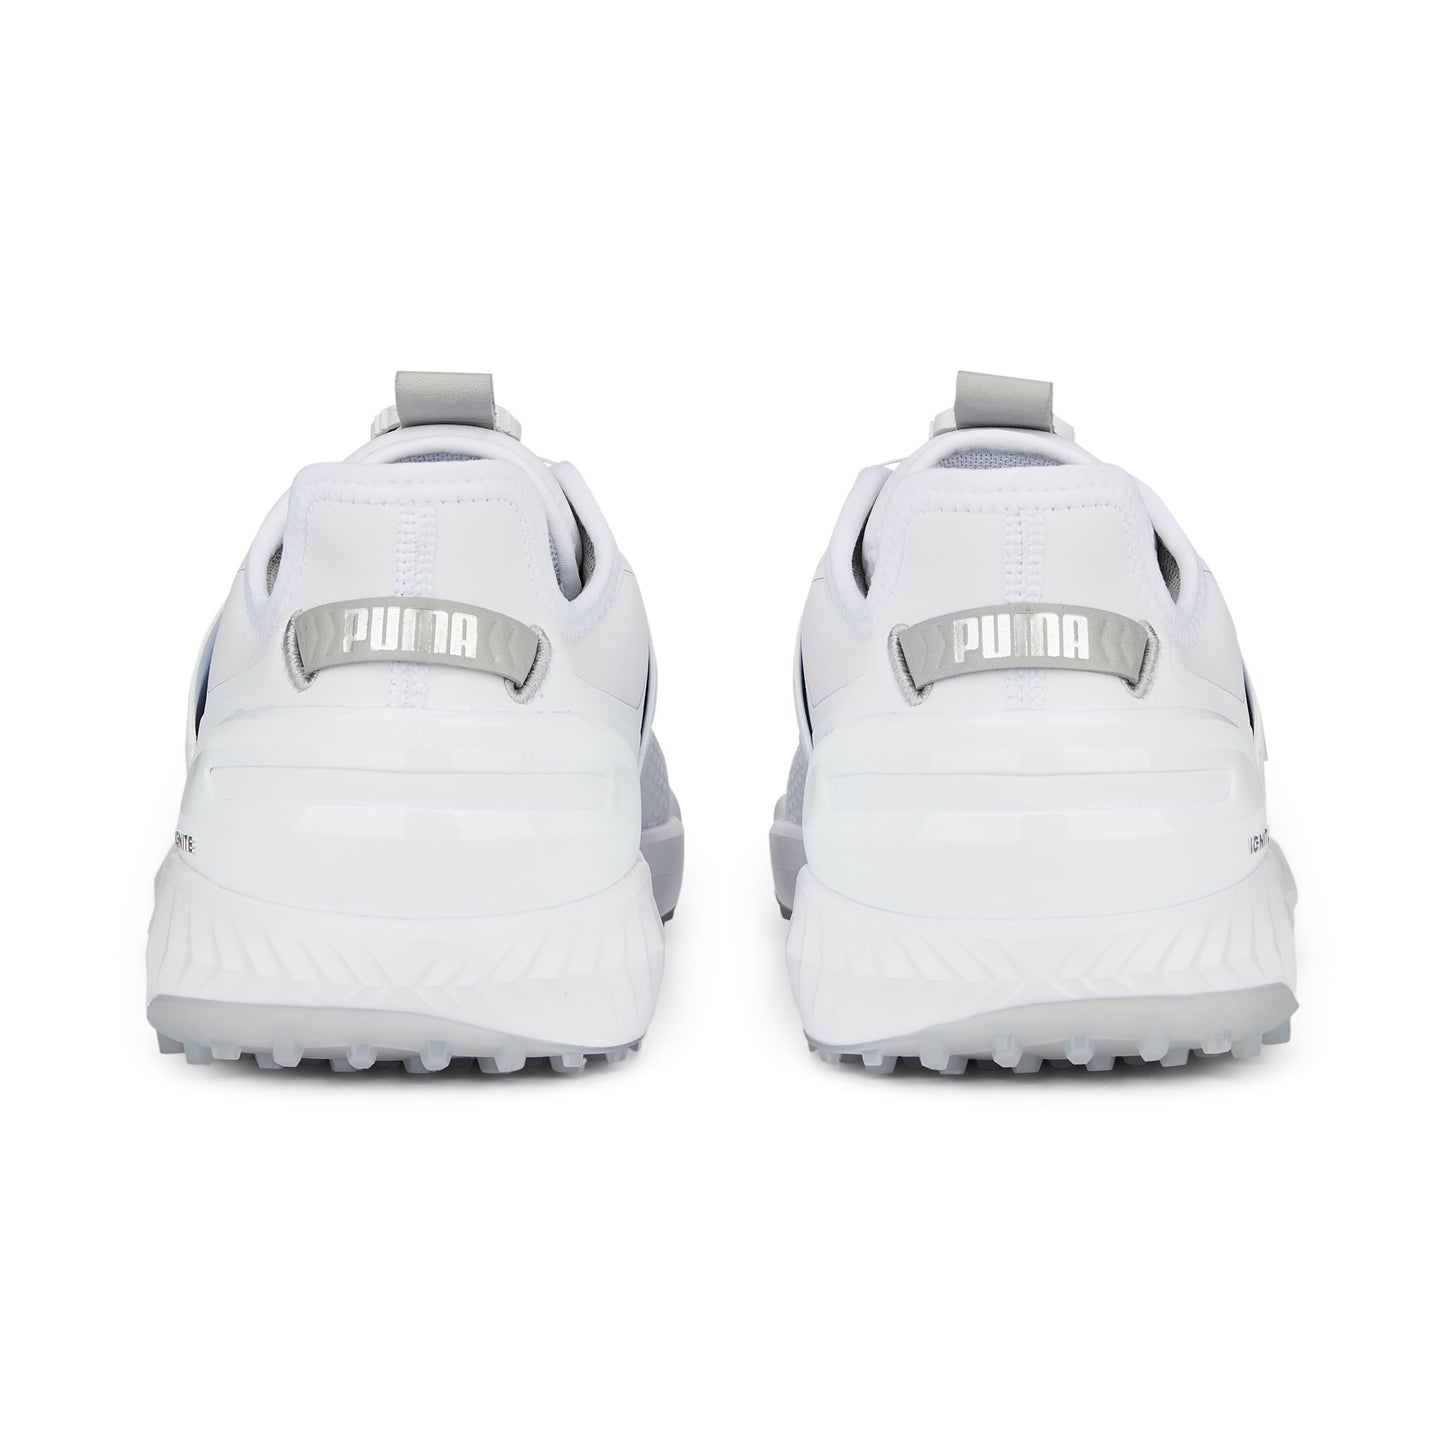 Puma Men's Ignite Elevate Disc Spikeless Golf Shoes - White/Silver